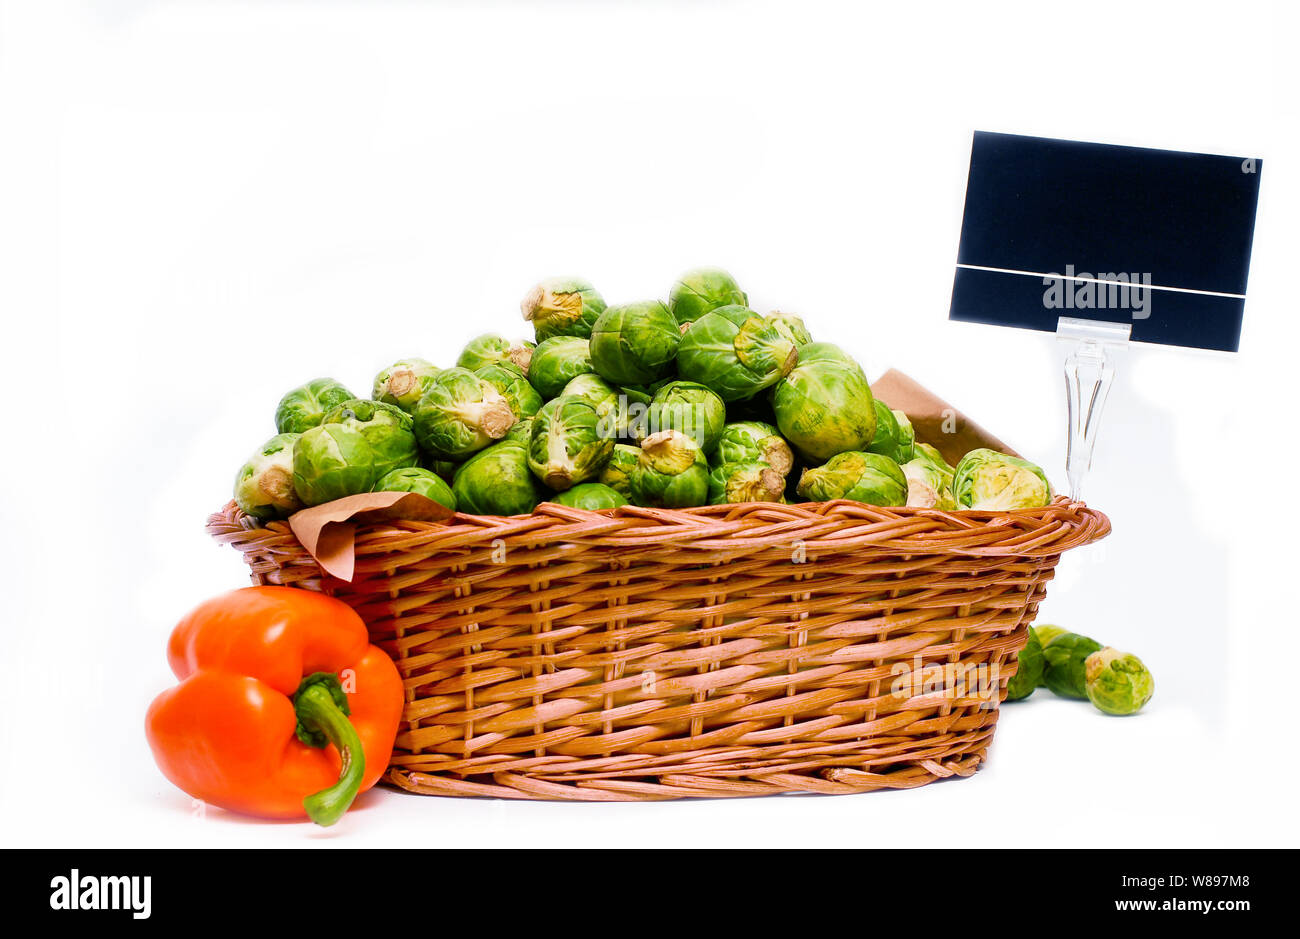 Wooden basket full of brussels sprouts and a orange capsicum on the side, for market use, isolated on whte with price tag. Stock Photo